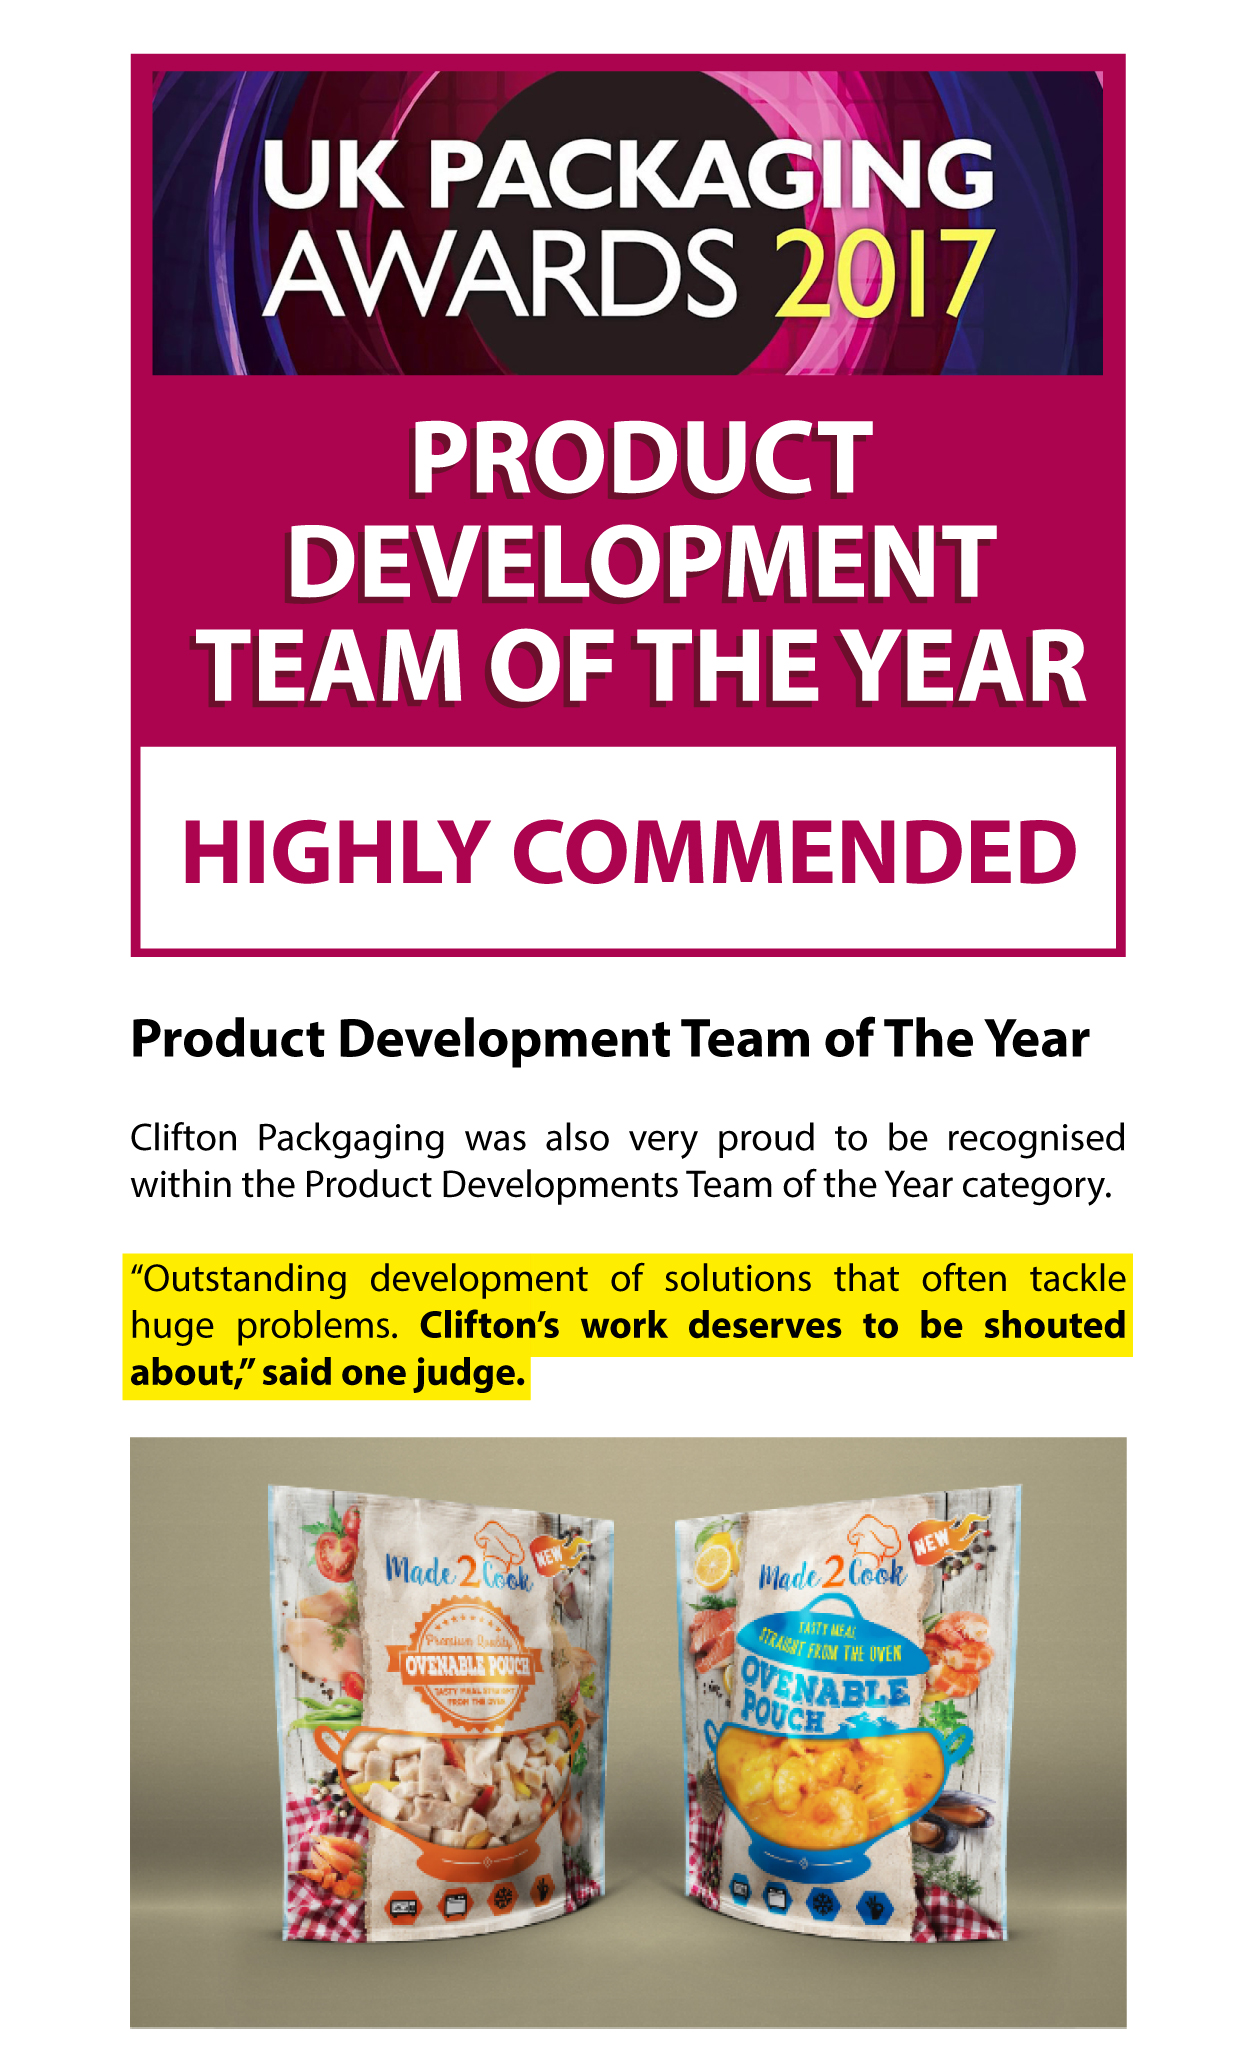 UK Packaging Awards 2017, Highly Commended Product Development Team of the Year, Clifton Packaging Group Ltd.